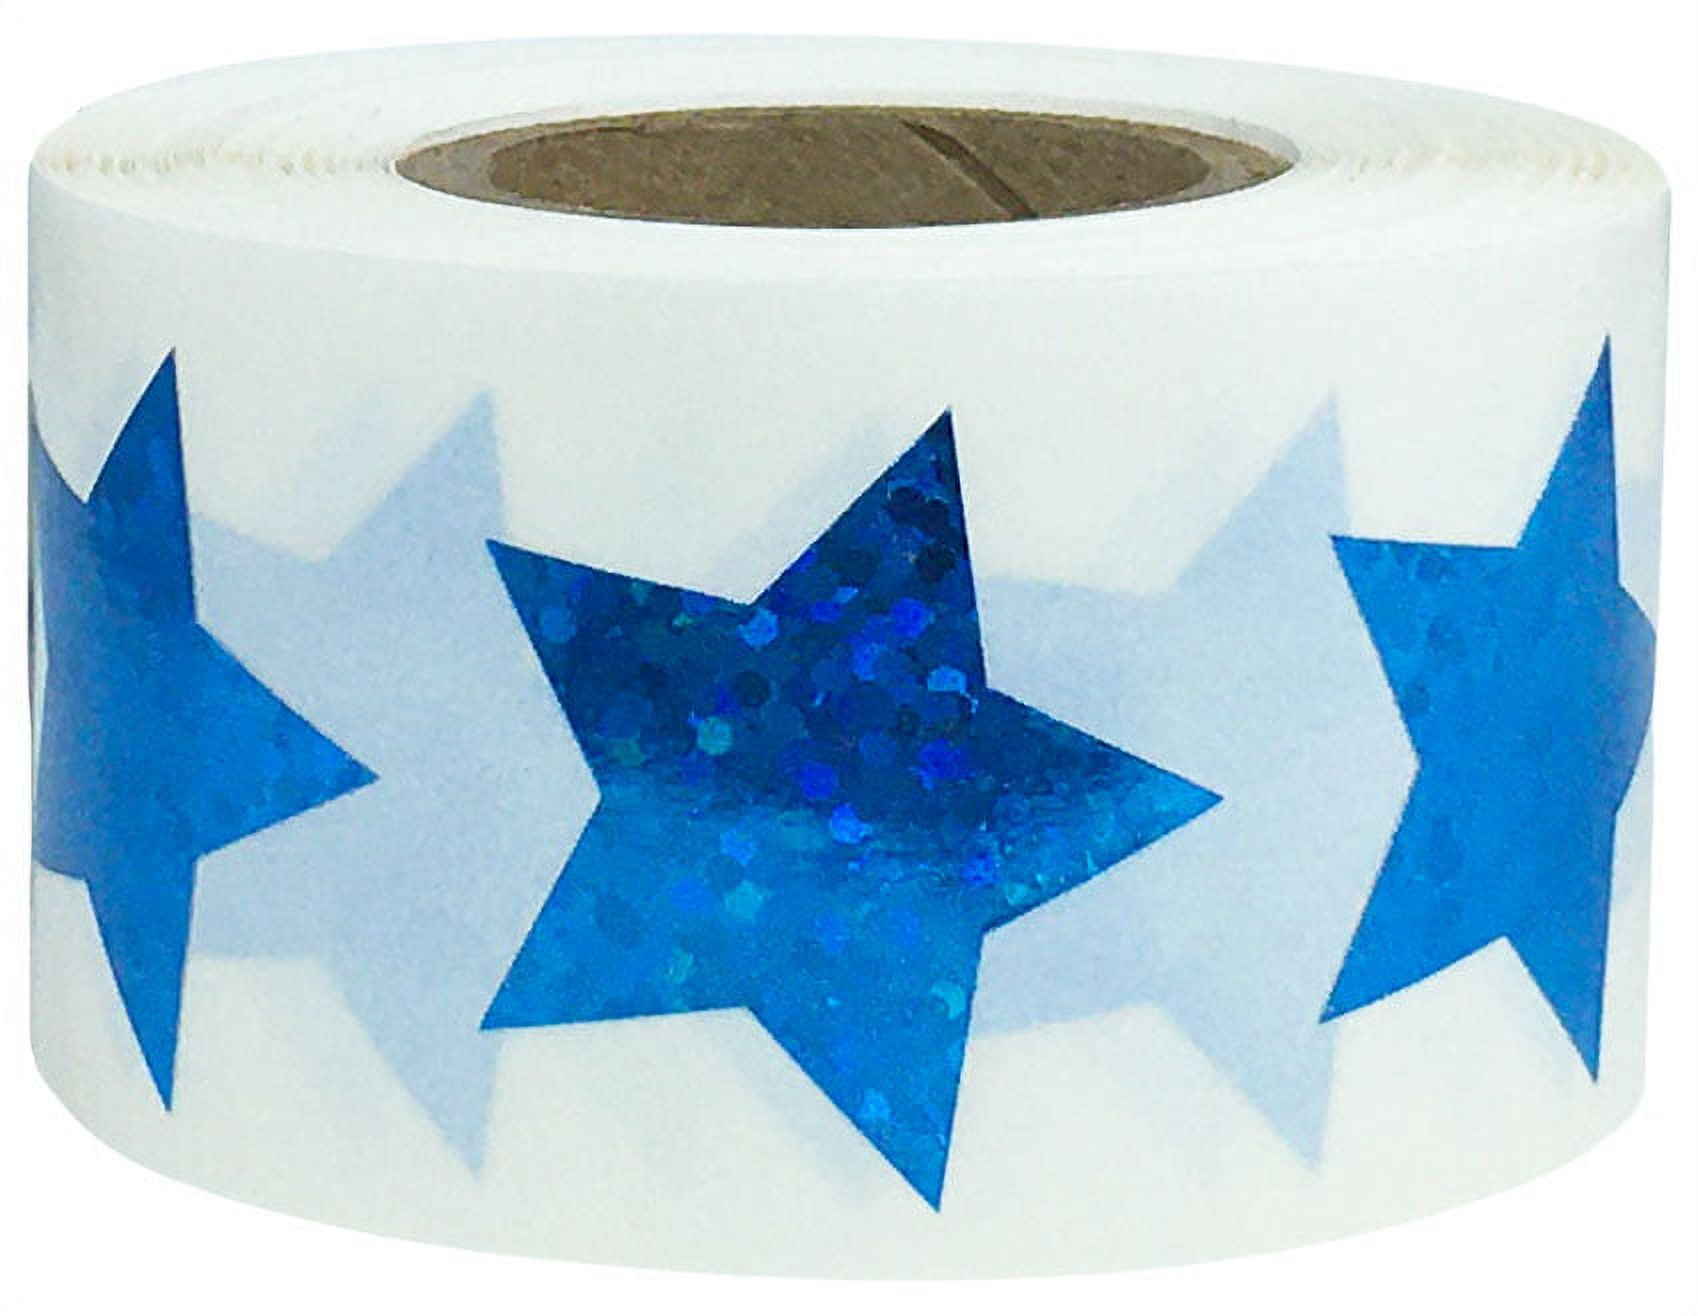 Holographic Glitter Star Stickers for Kids Reward,Foil Tiny Star Metallic  Stickers Roll Self Adhesive Reflective Stickers for Wall, Crafts and  Classroom Teachers - Style:Style 3 